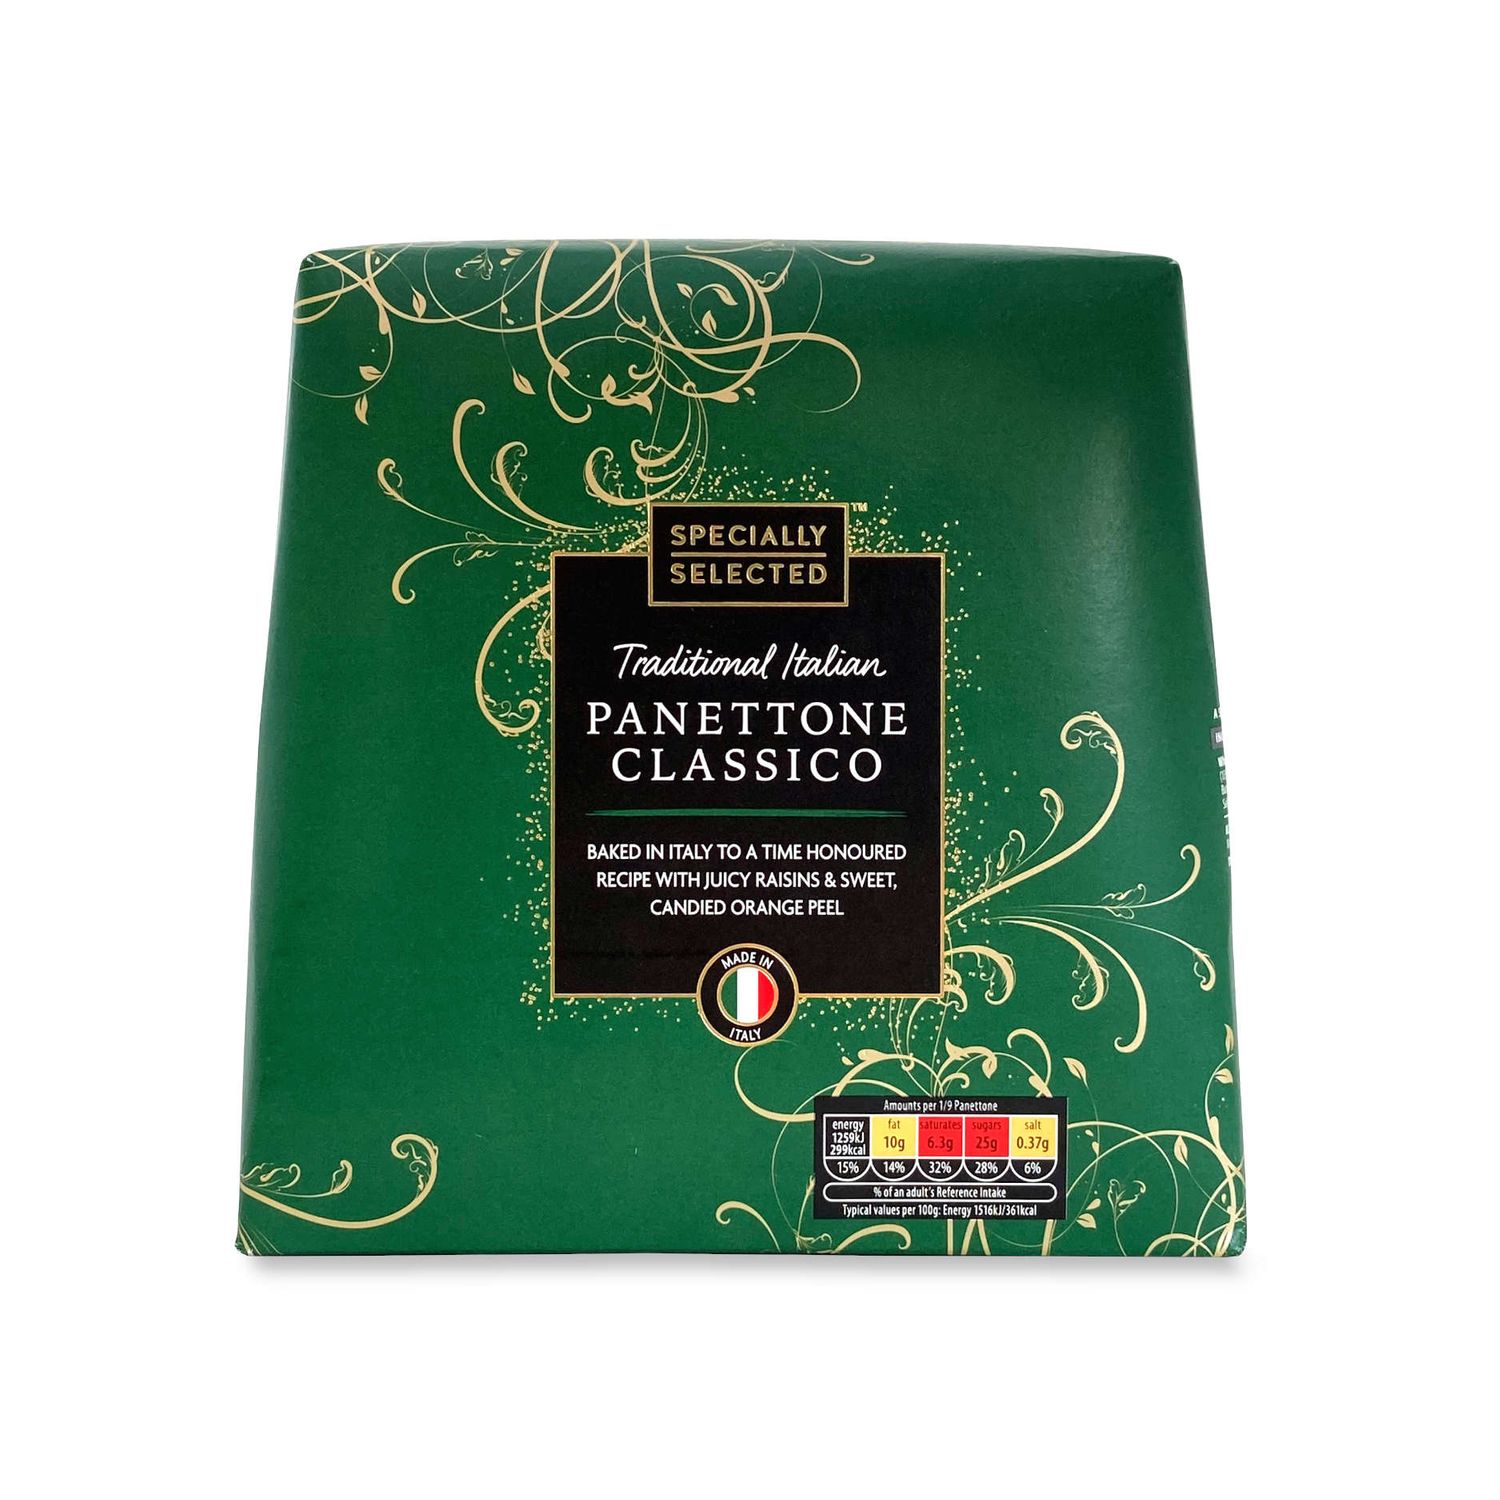 Specially Selected Traditional Italian Panettone Classico 750g